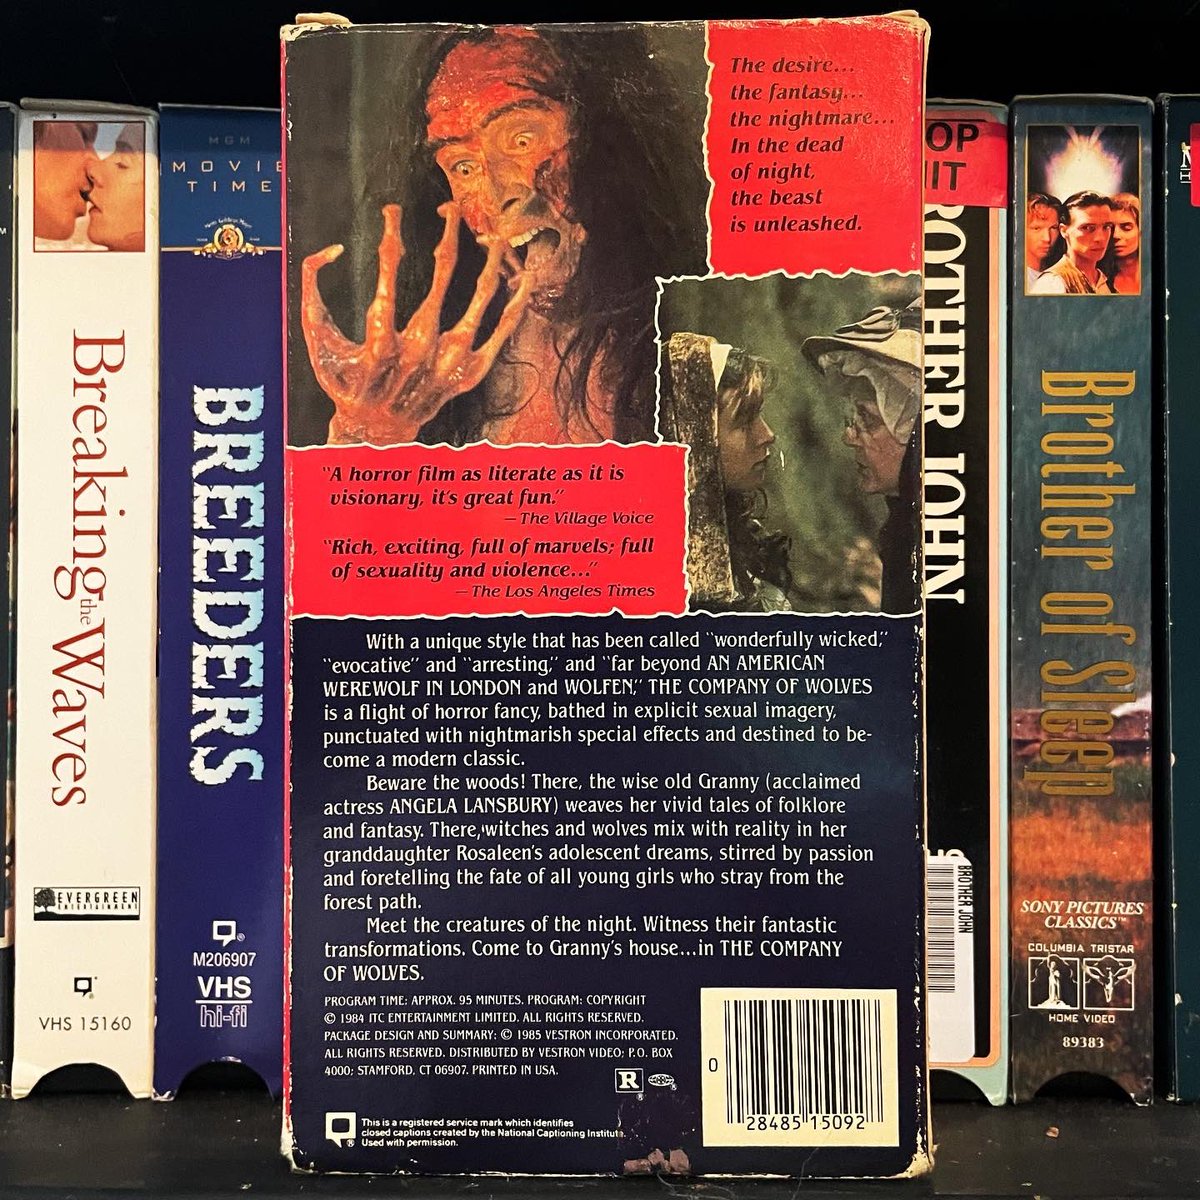 “Never stray from the path, never eat a windfall apple and never trust a man whose eyebrows meet in the middle”
#thecompanyofwolves #80scinema #werewolfmovie #neiljordan #angelalansbury #sarahpatterson #davidwarner #stephenrea #grahamcrowden #georgefenton #vhs #vhsforever